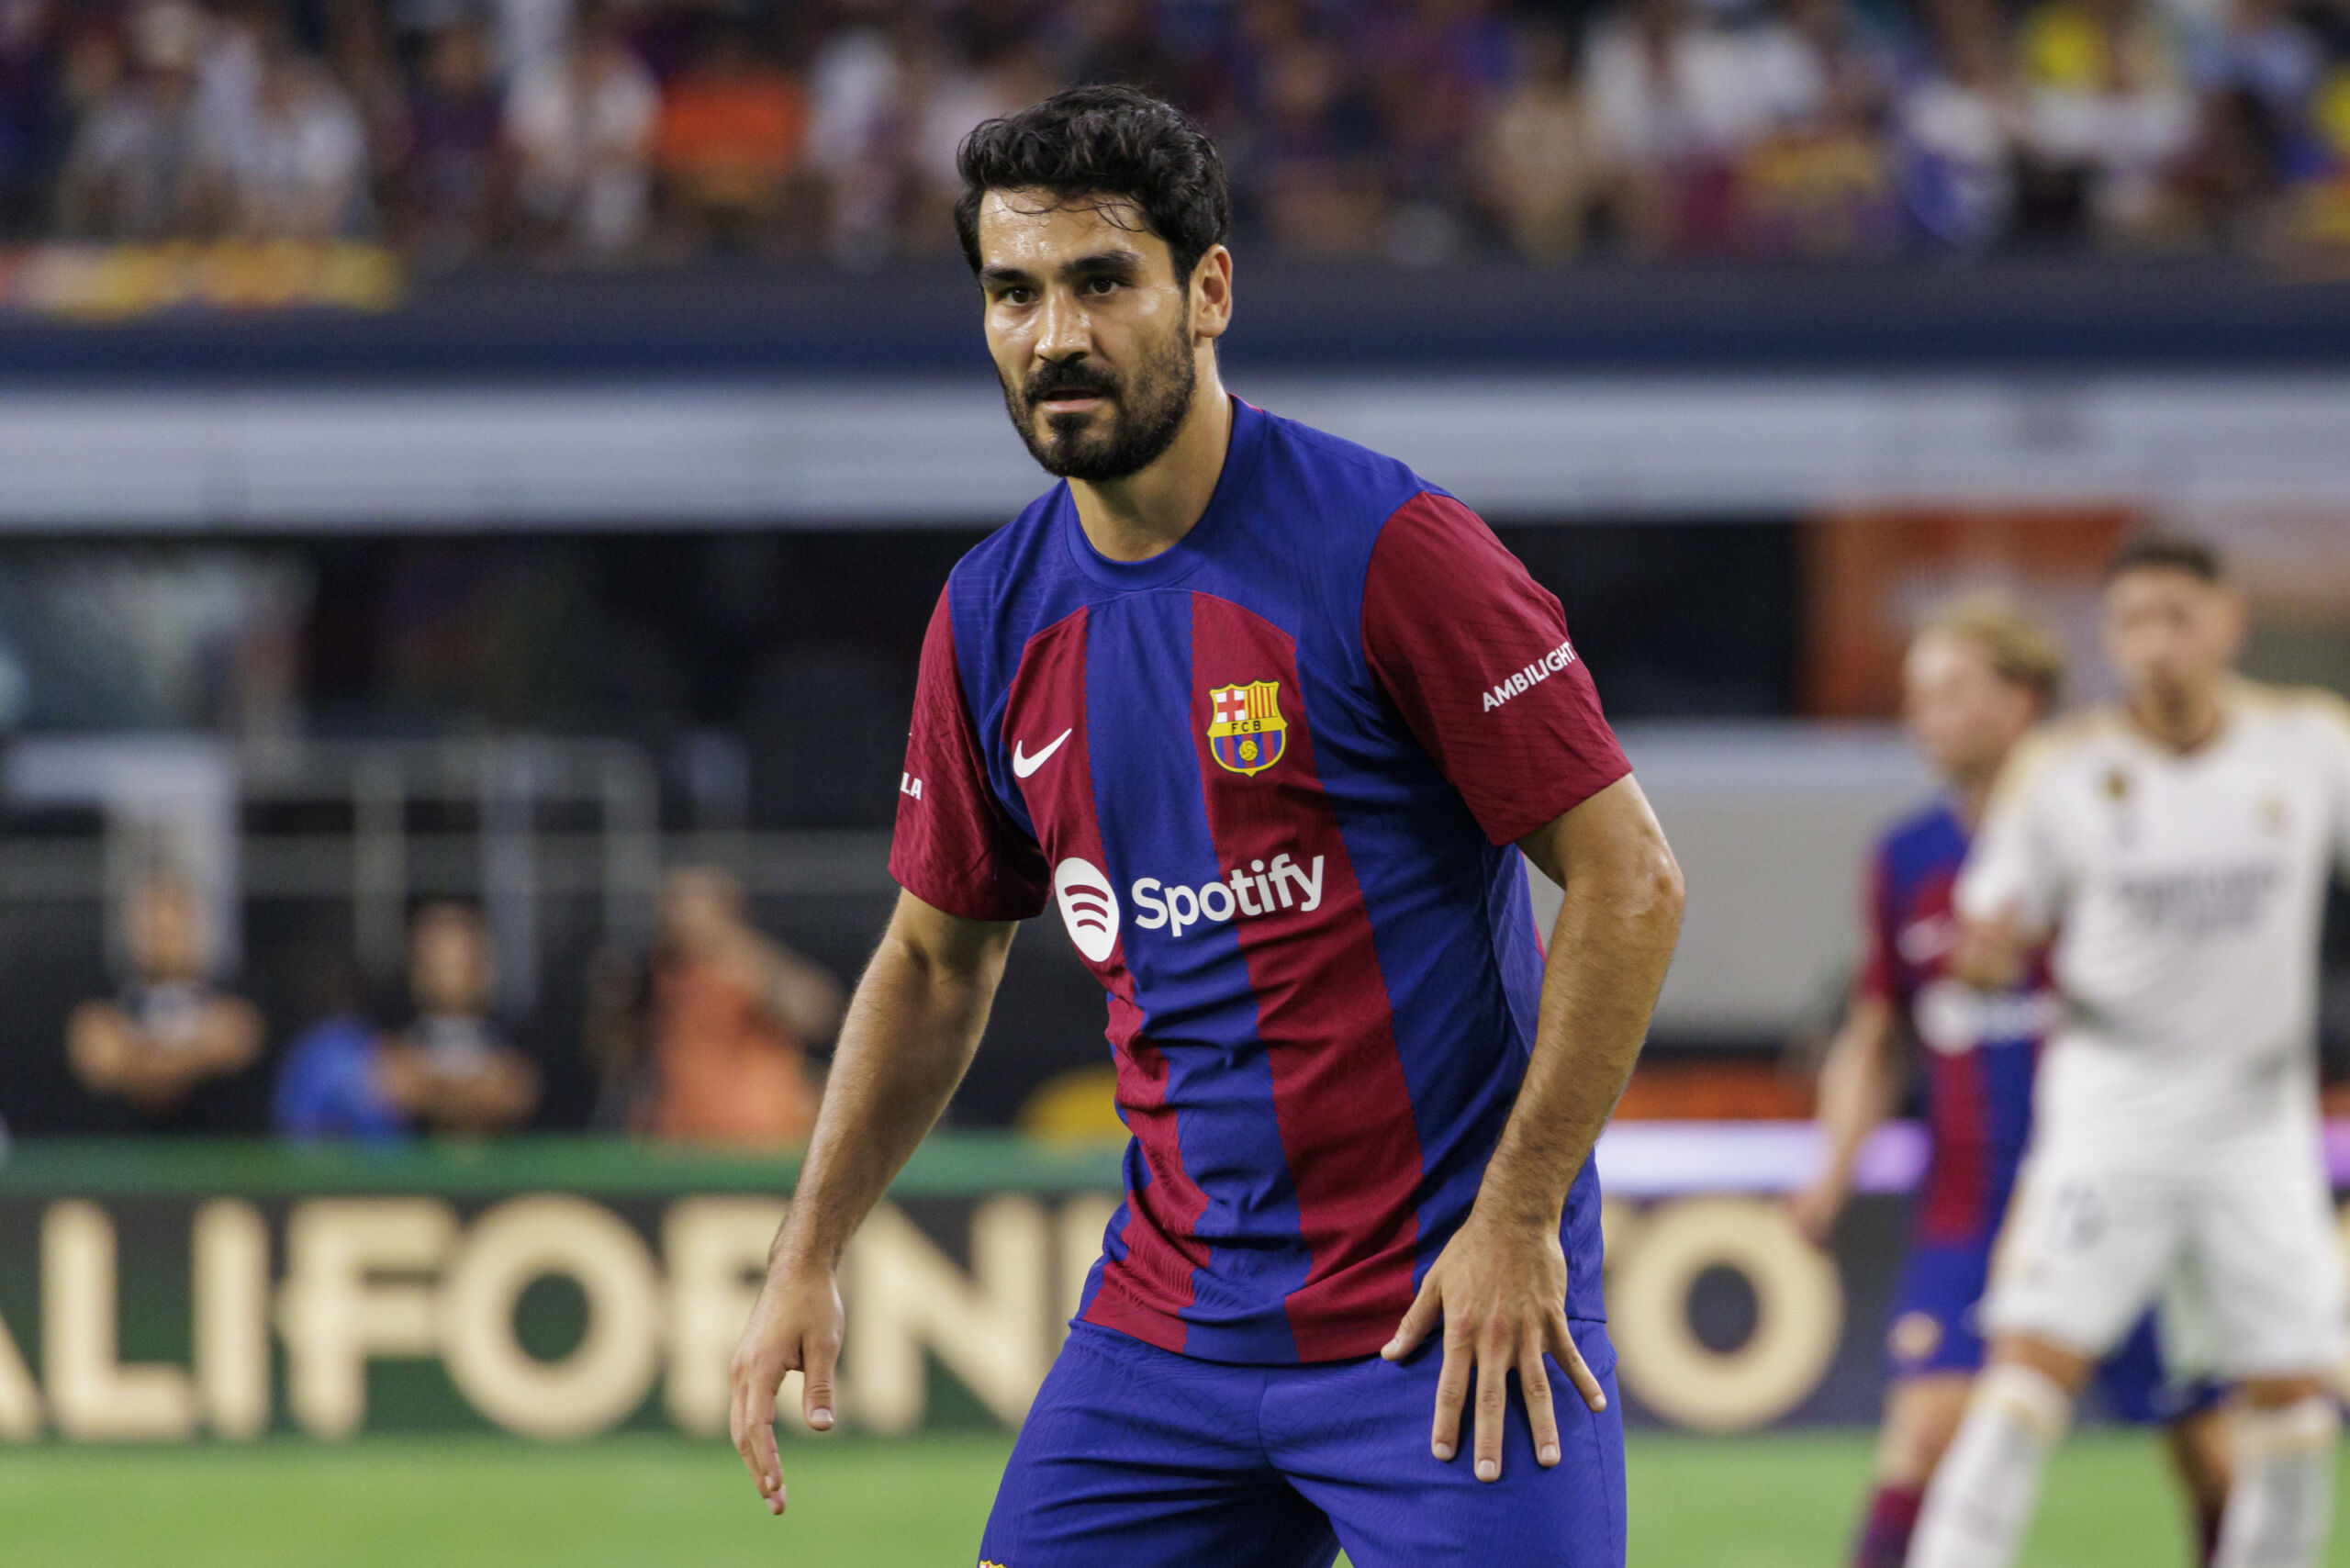 Barcelona will be able to register key players ahead of the Getafe game